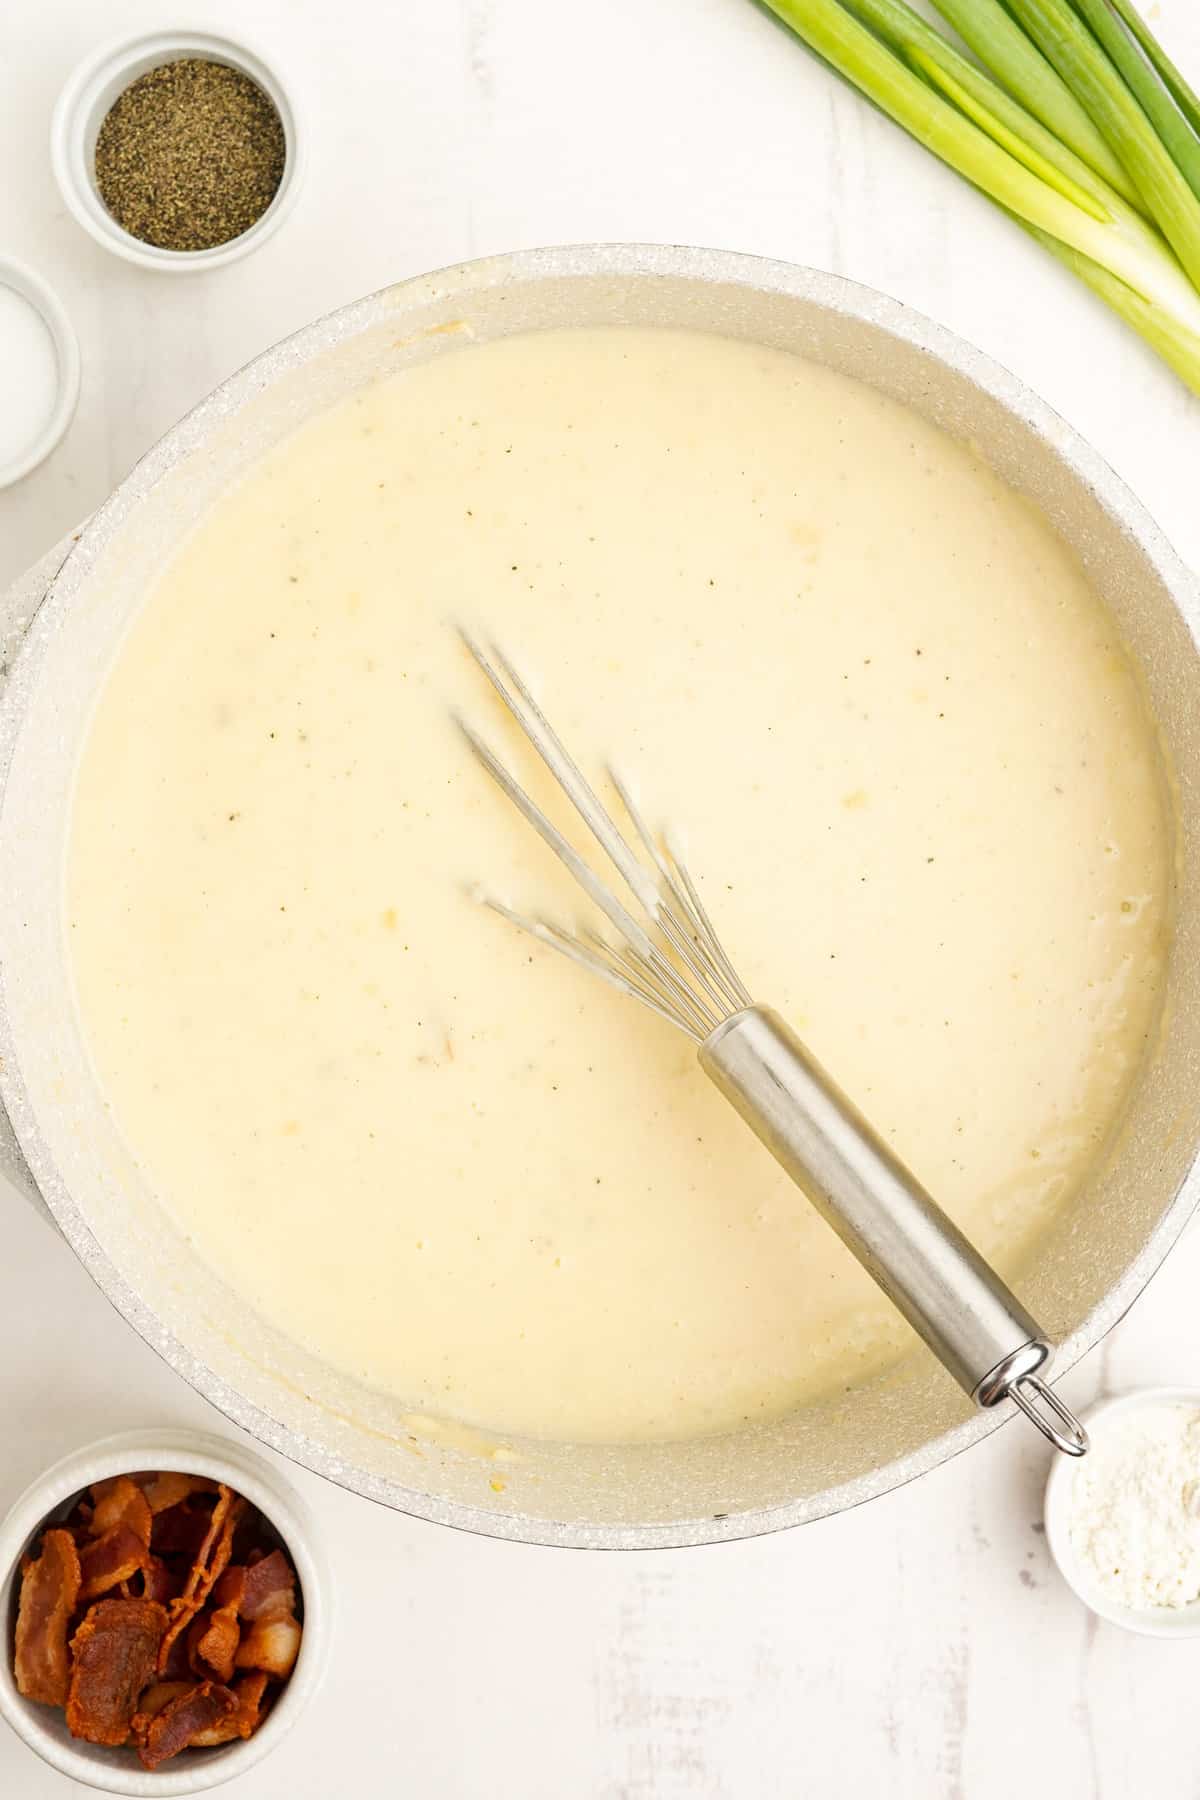 Mashed potato soup in skillet with whisk